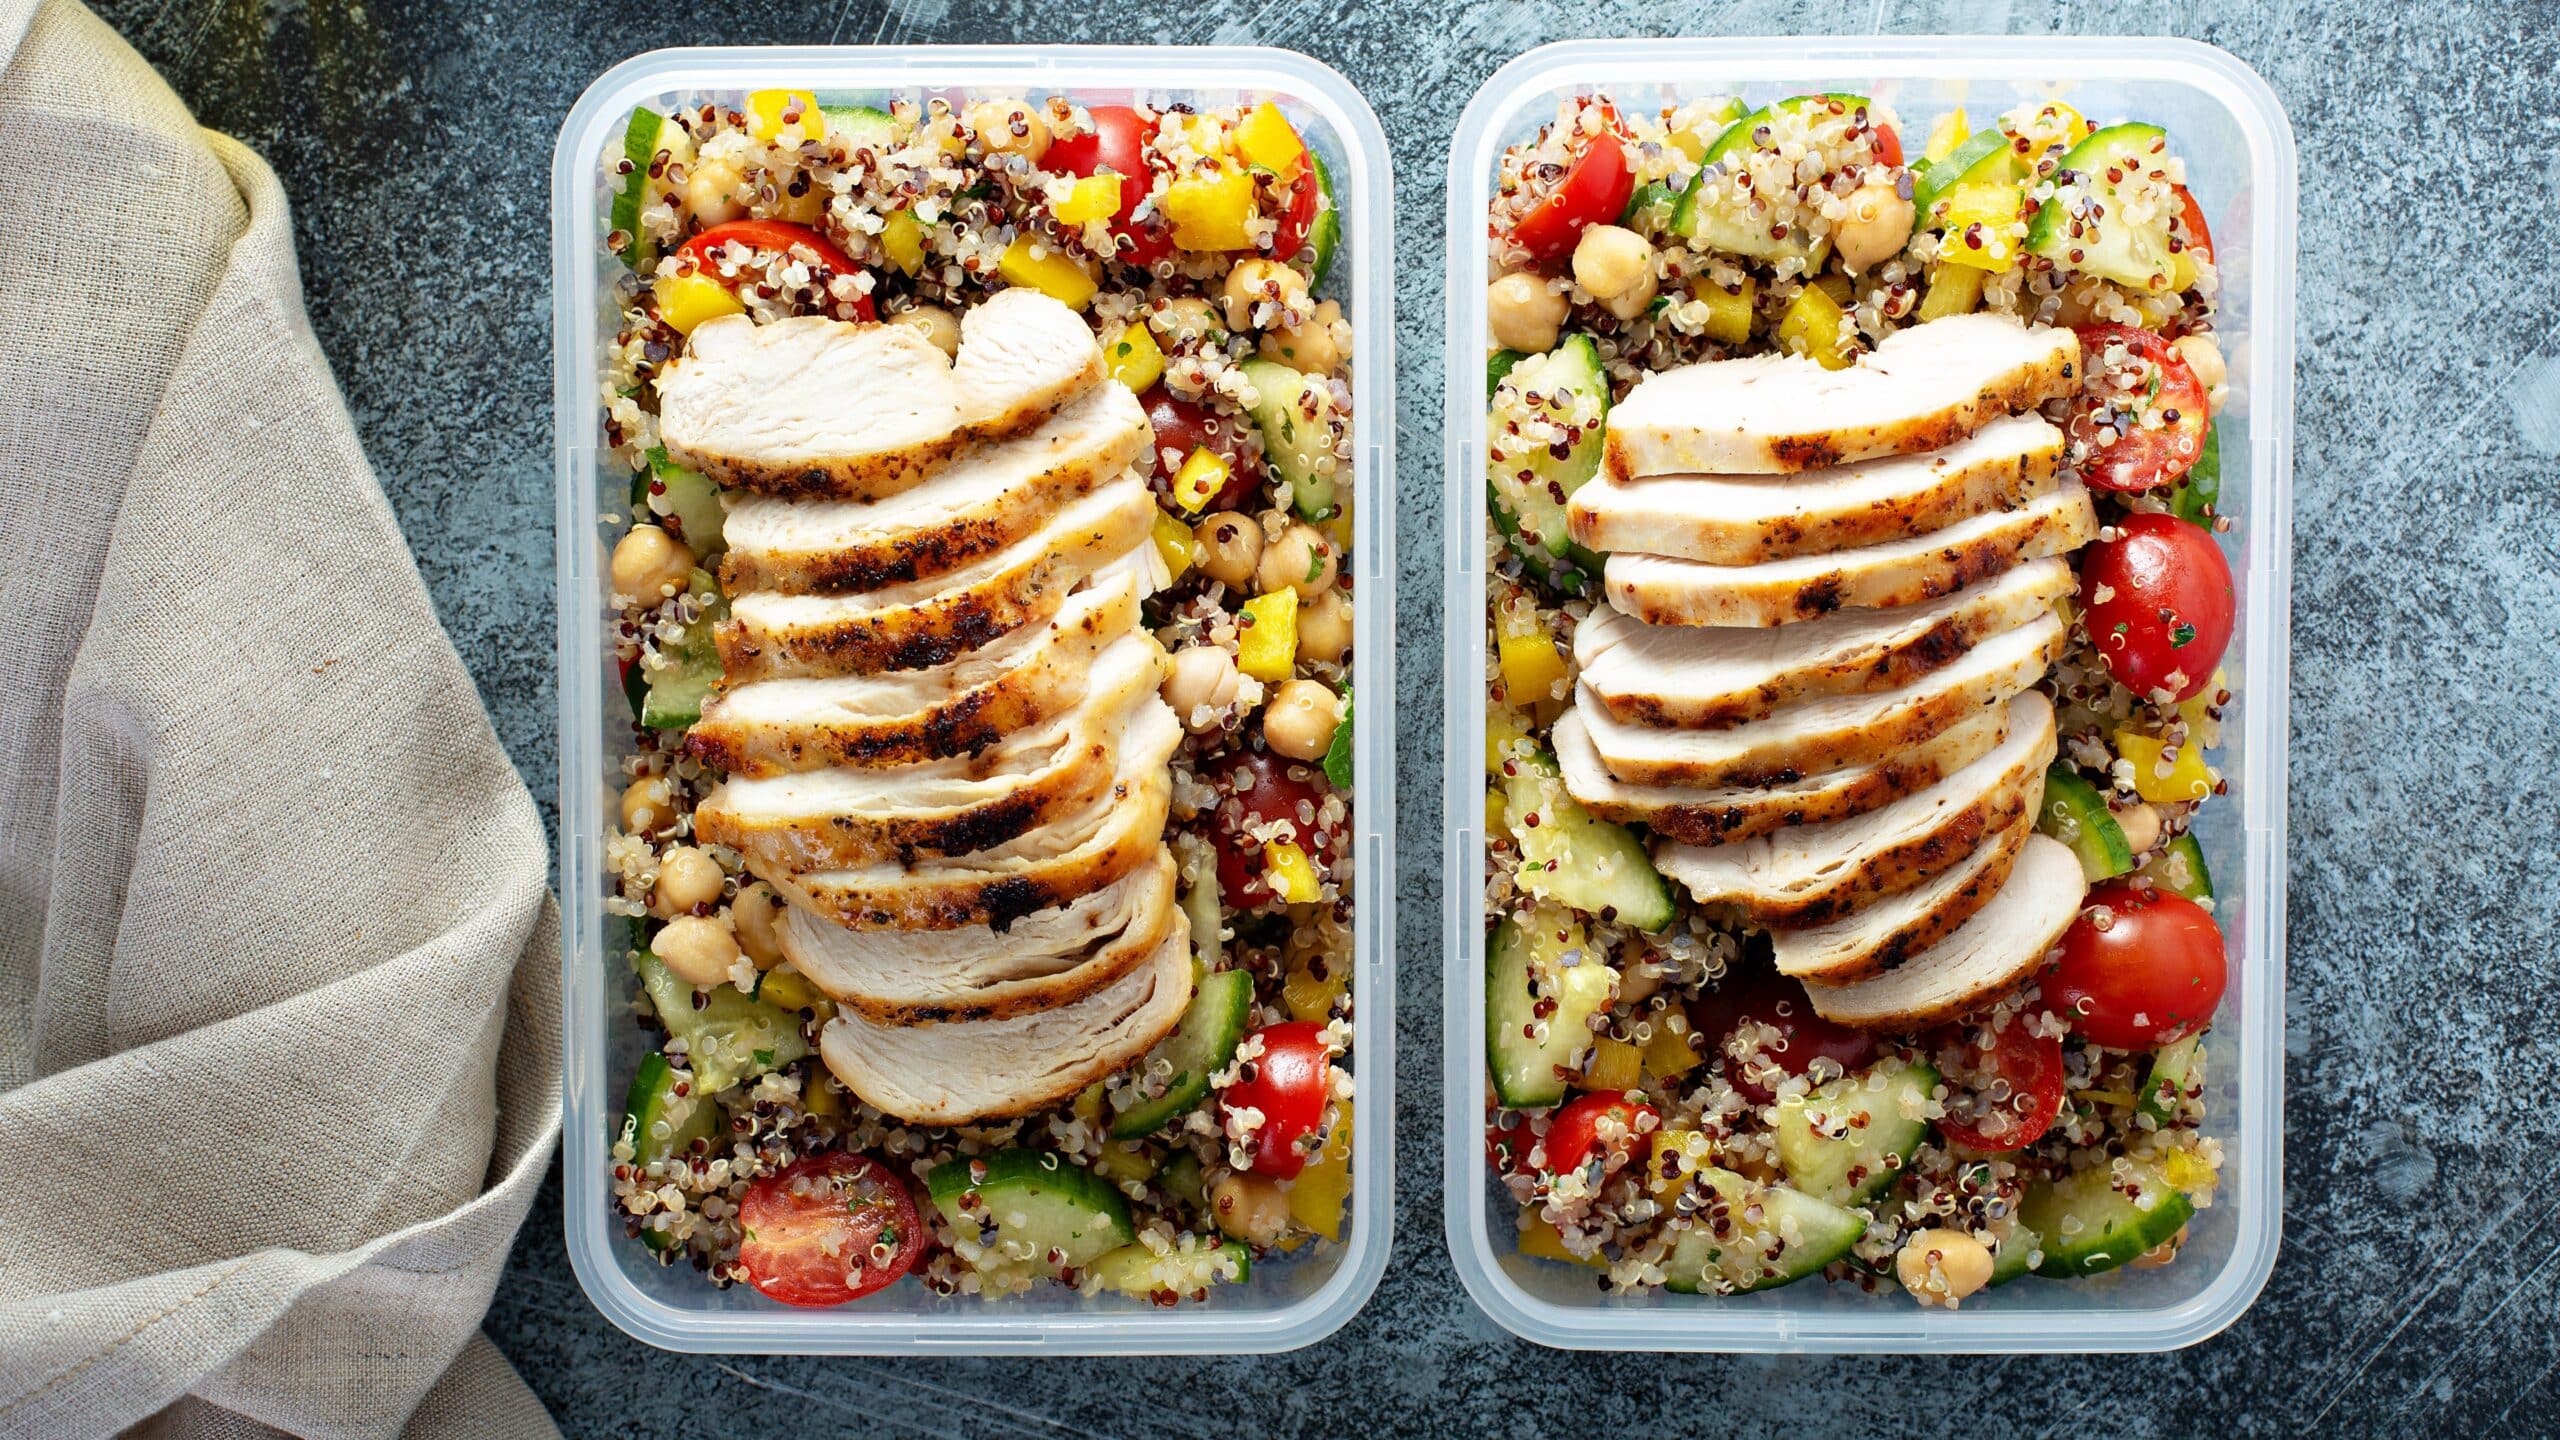 Chicken quinoa salad in meal prep containers